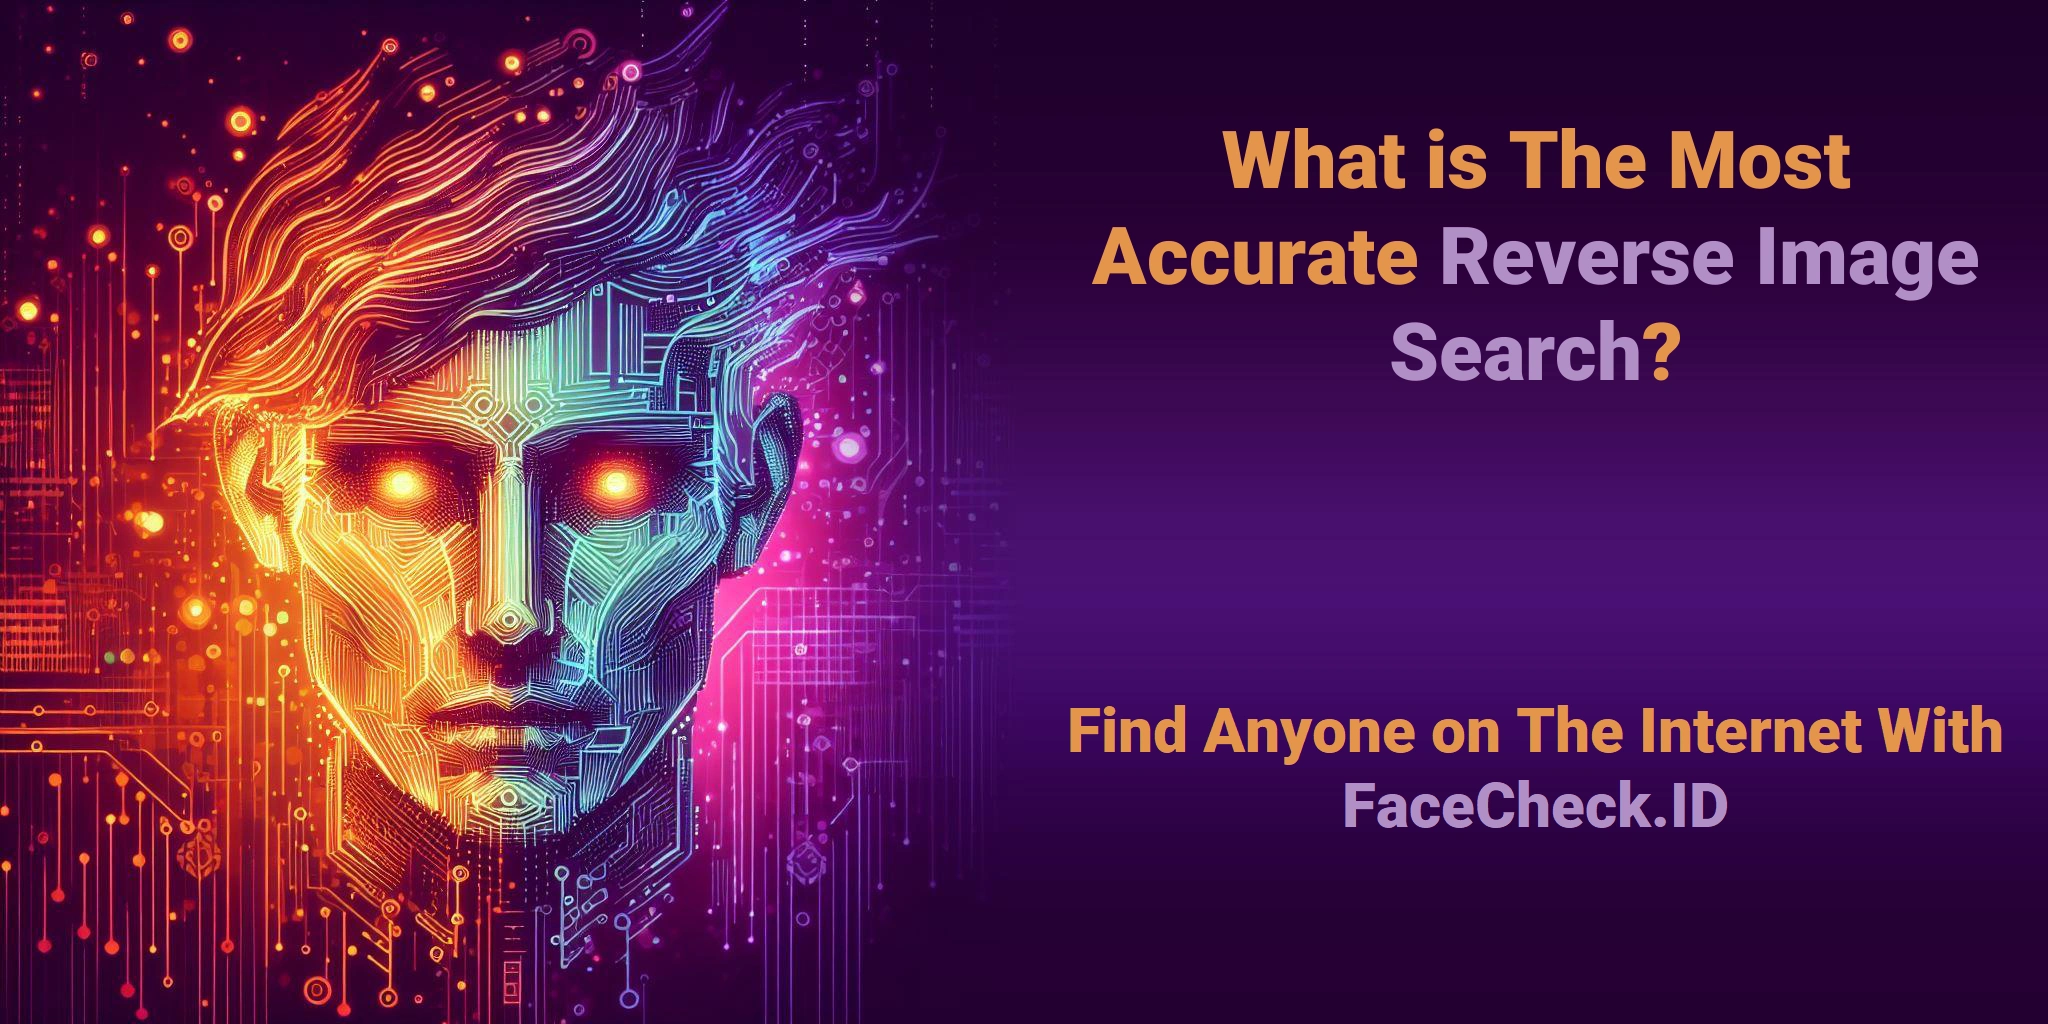 What is The Most Accurate Reverse Image Search? Find Anyone on The Internet With FaceCheck.ID